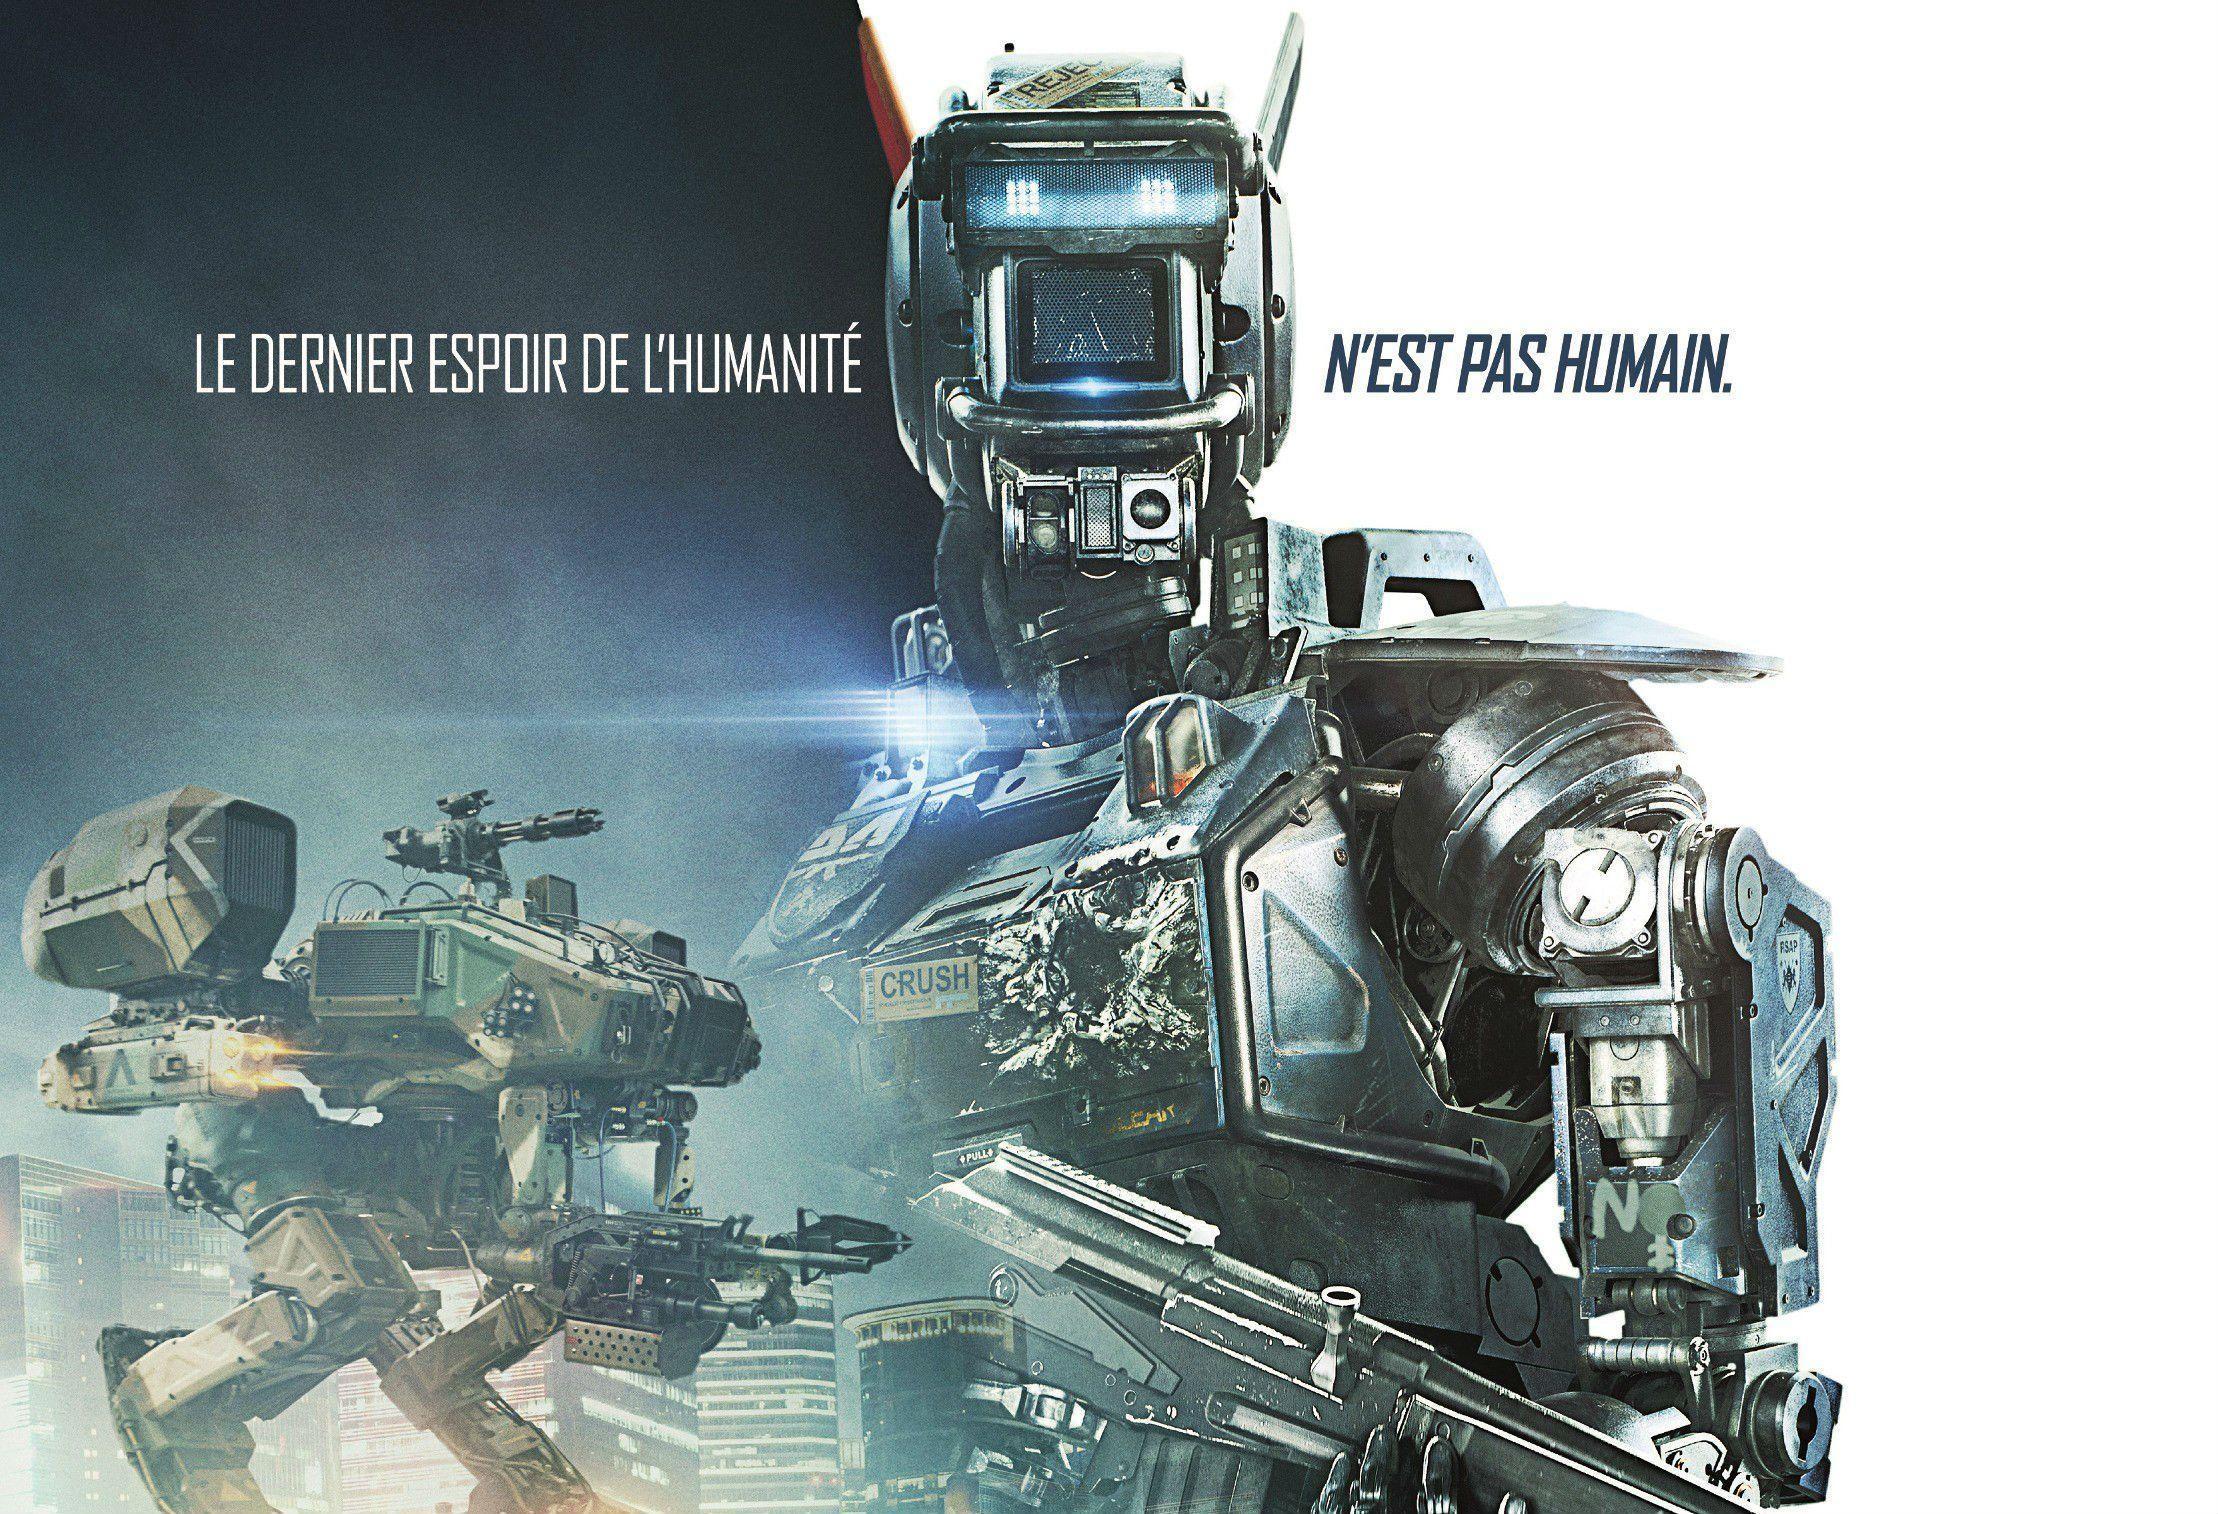 CHAPPIE Sci Fi Futuristic Action Thriller Robot Cyborg Action